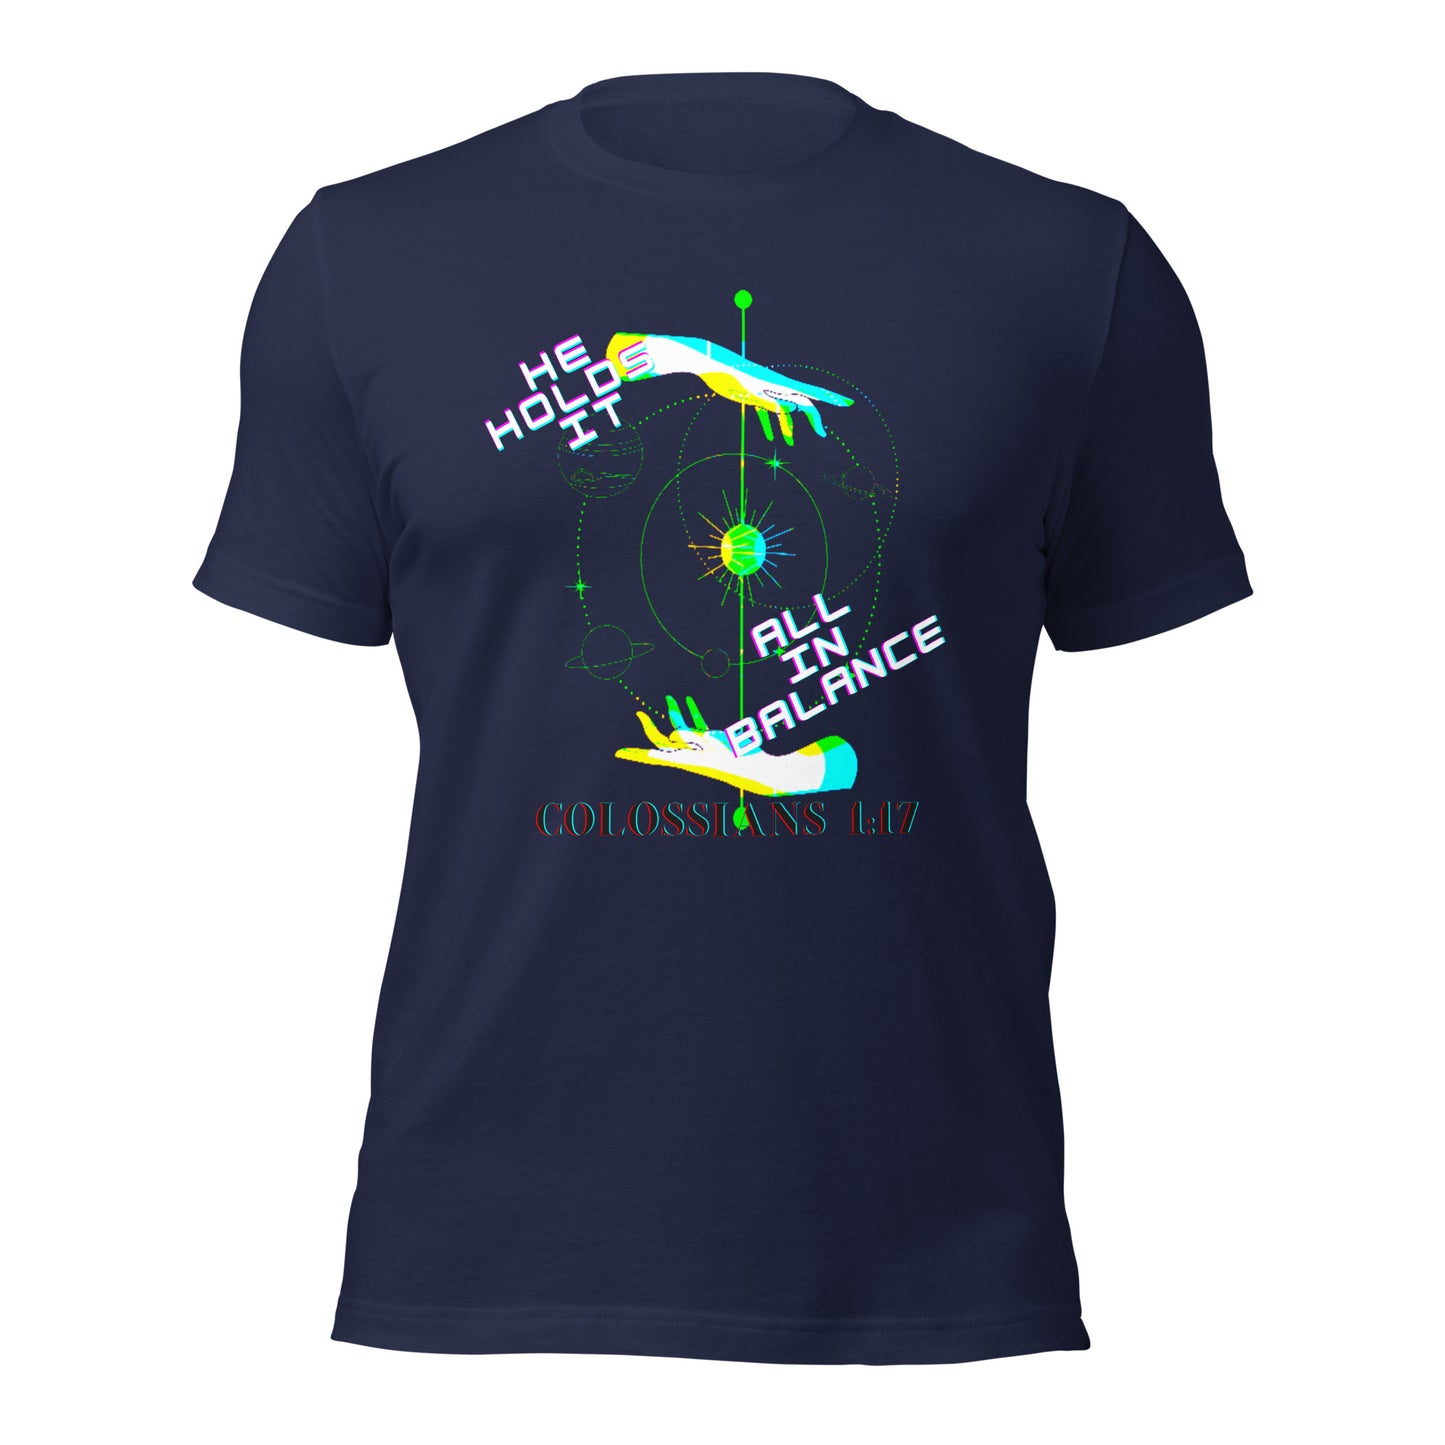 He Holds It All in Balance - Colossians 1:17 - Women's Tee